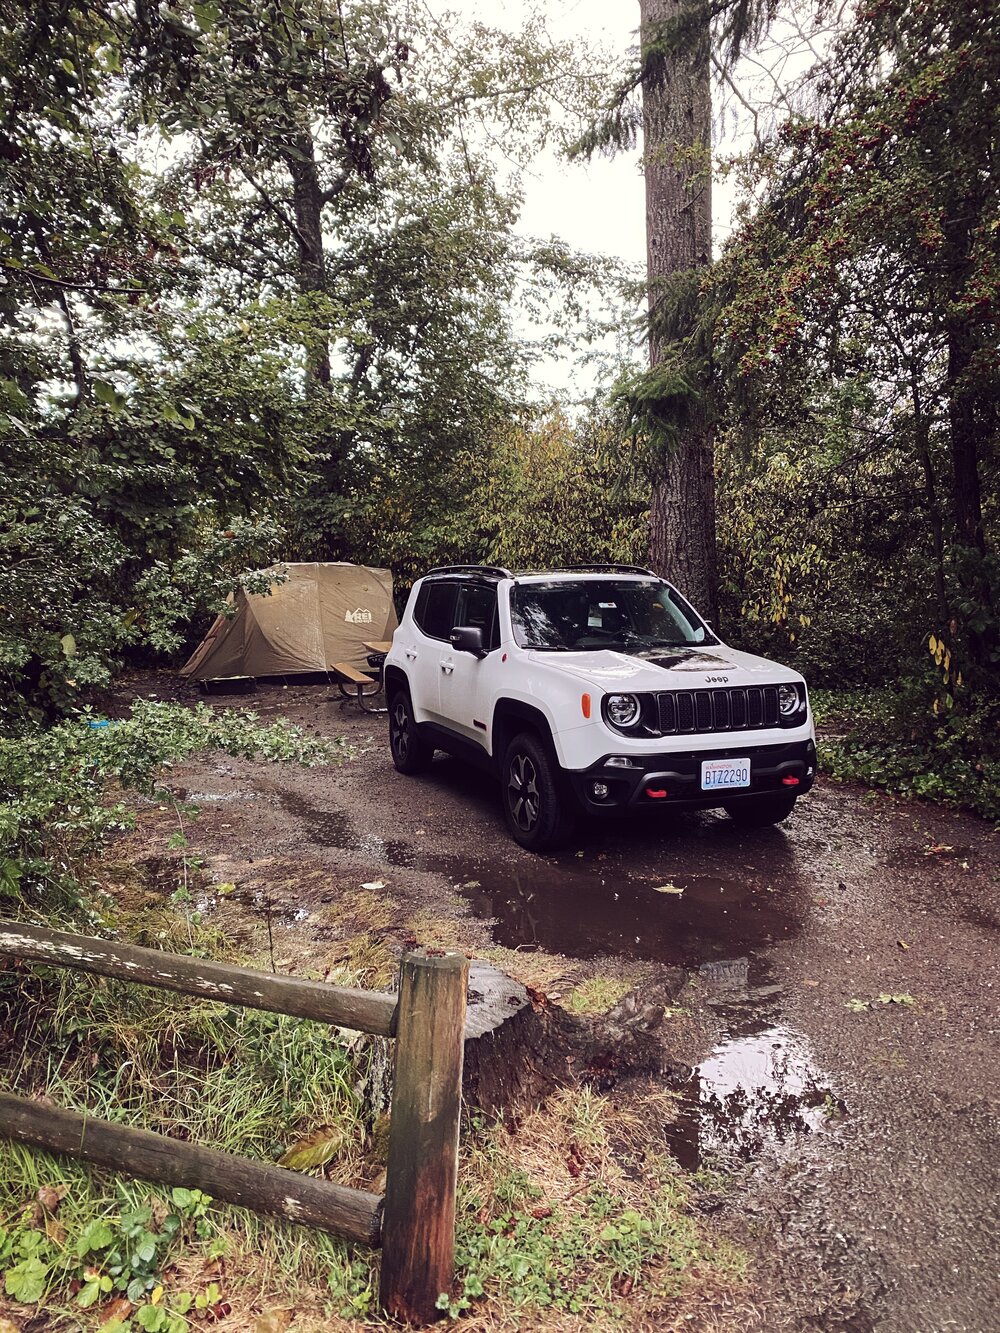 Jeep Renegade Trailhawk in our campsite at Kitsap Memorial State Park next to REI Kingdom 4 Tent